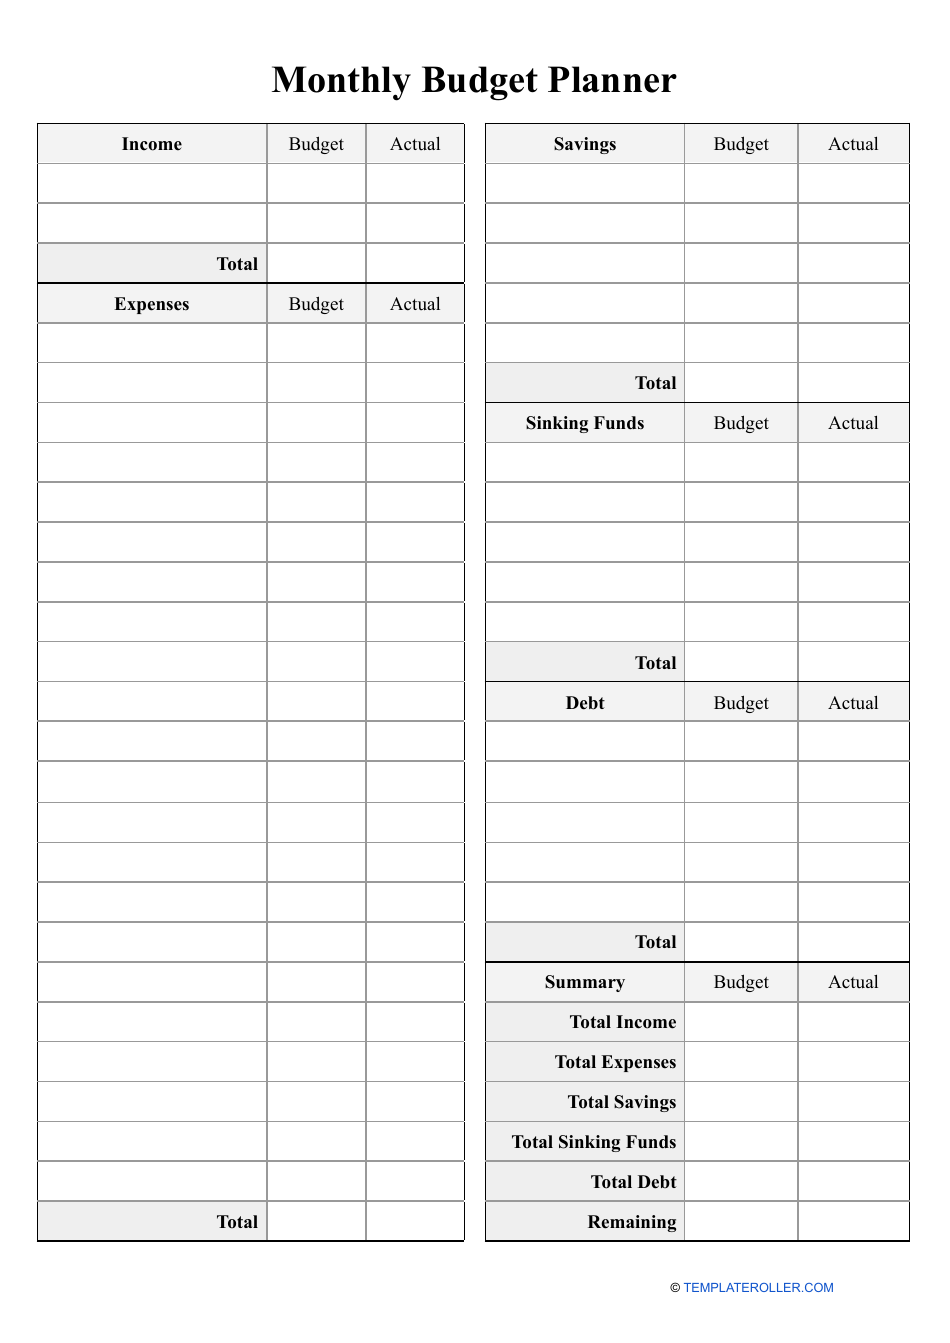 Monthly Budget Planner Template - Preview Image